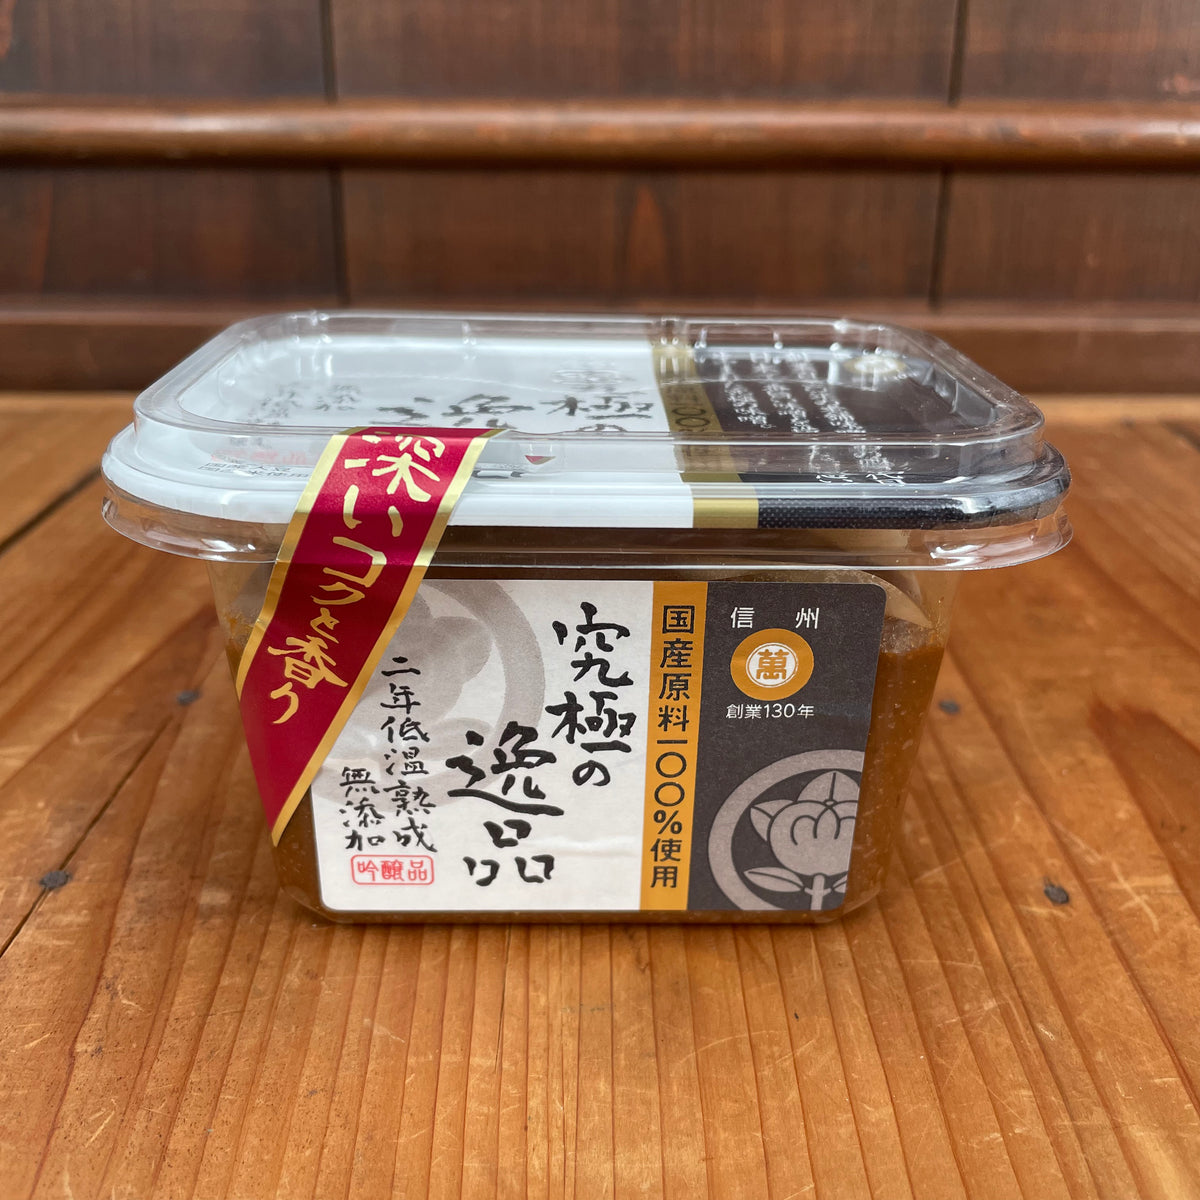 Ultimate Masterpiece 2-Year Fermented Miso Paste - 300g